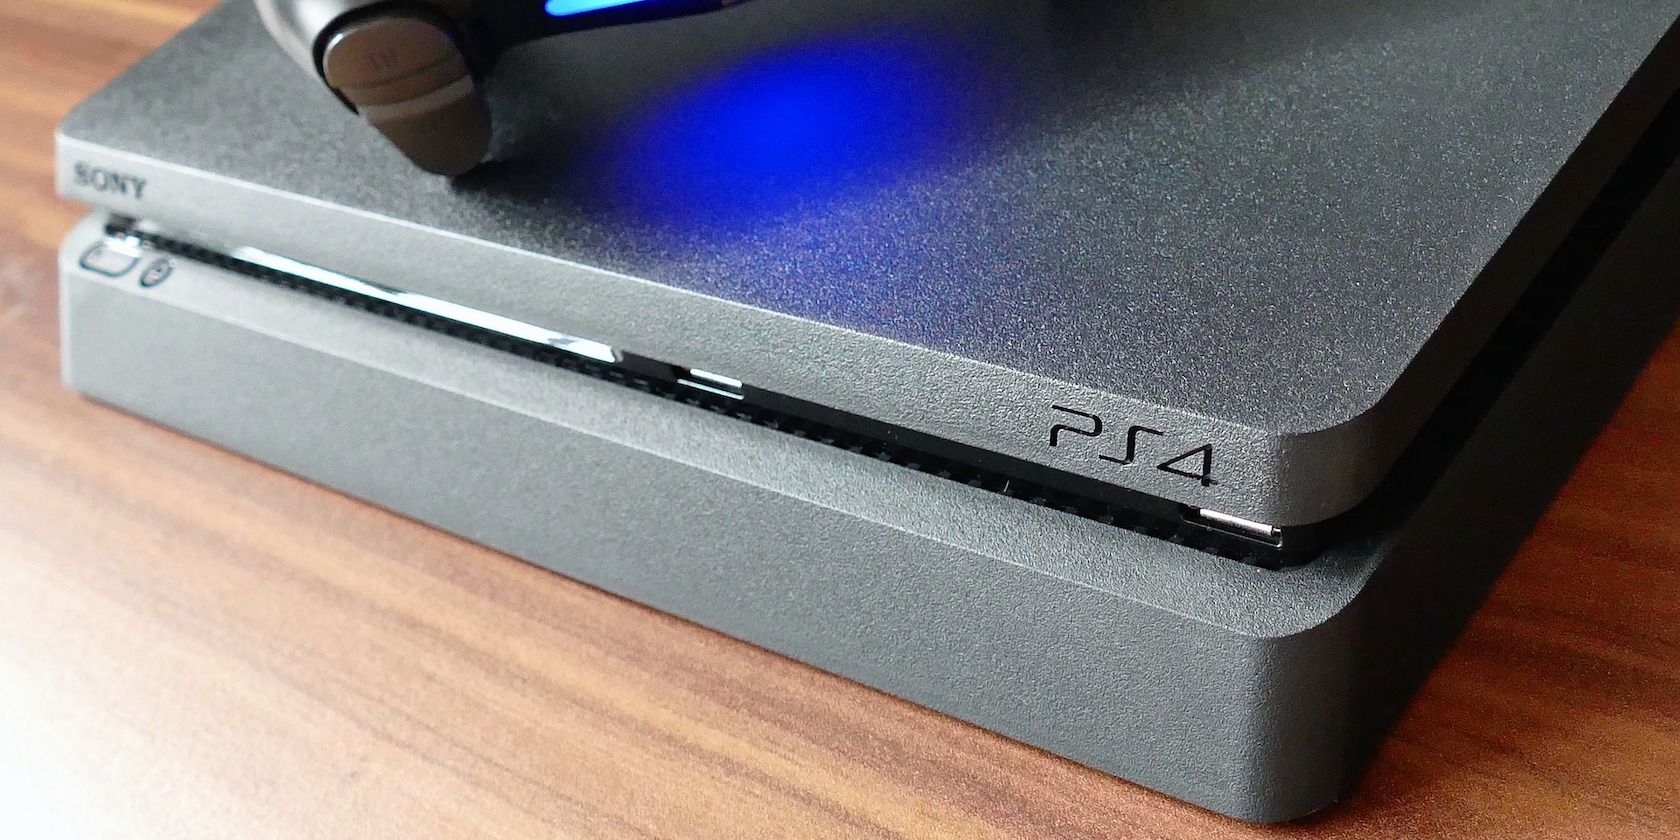 PS4 slim on wooden table